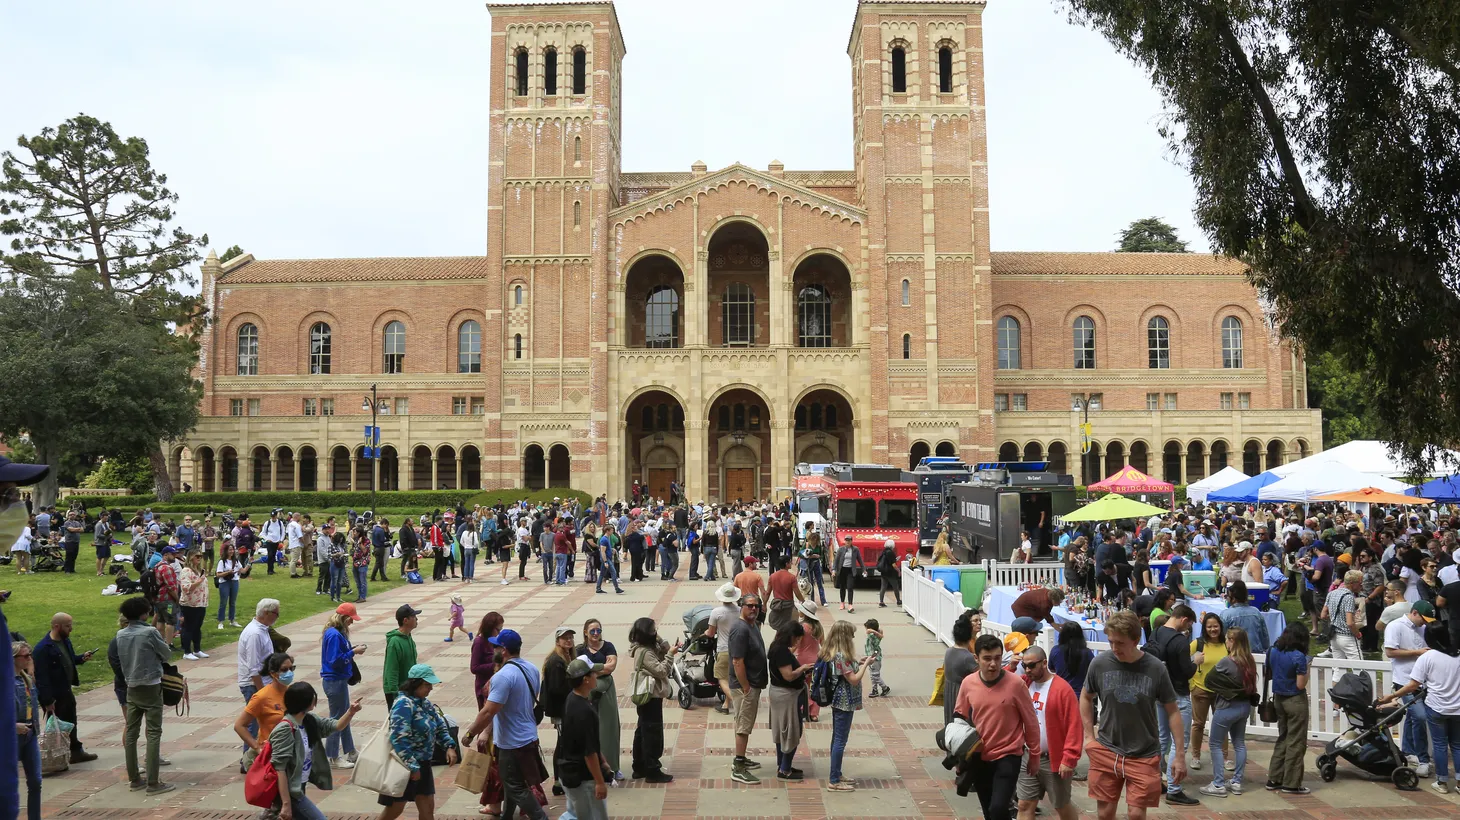 Over 7500 attendees devoured 500 pies as KCRW's Good Food PieFest & Contest returned to Royce Quad at UCLA.